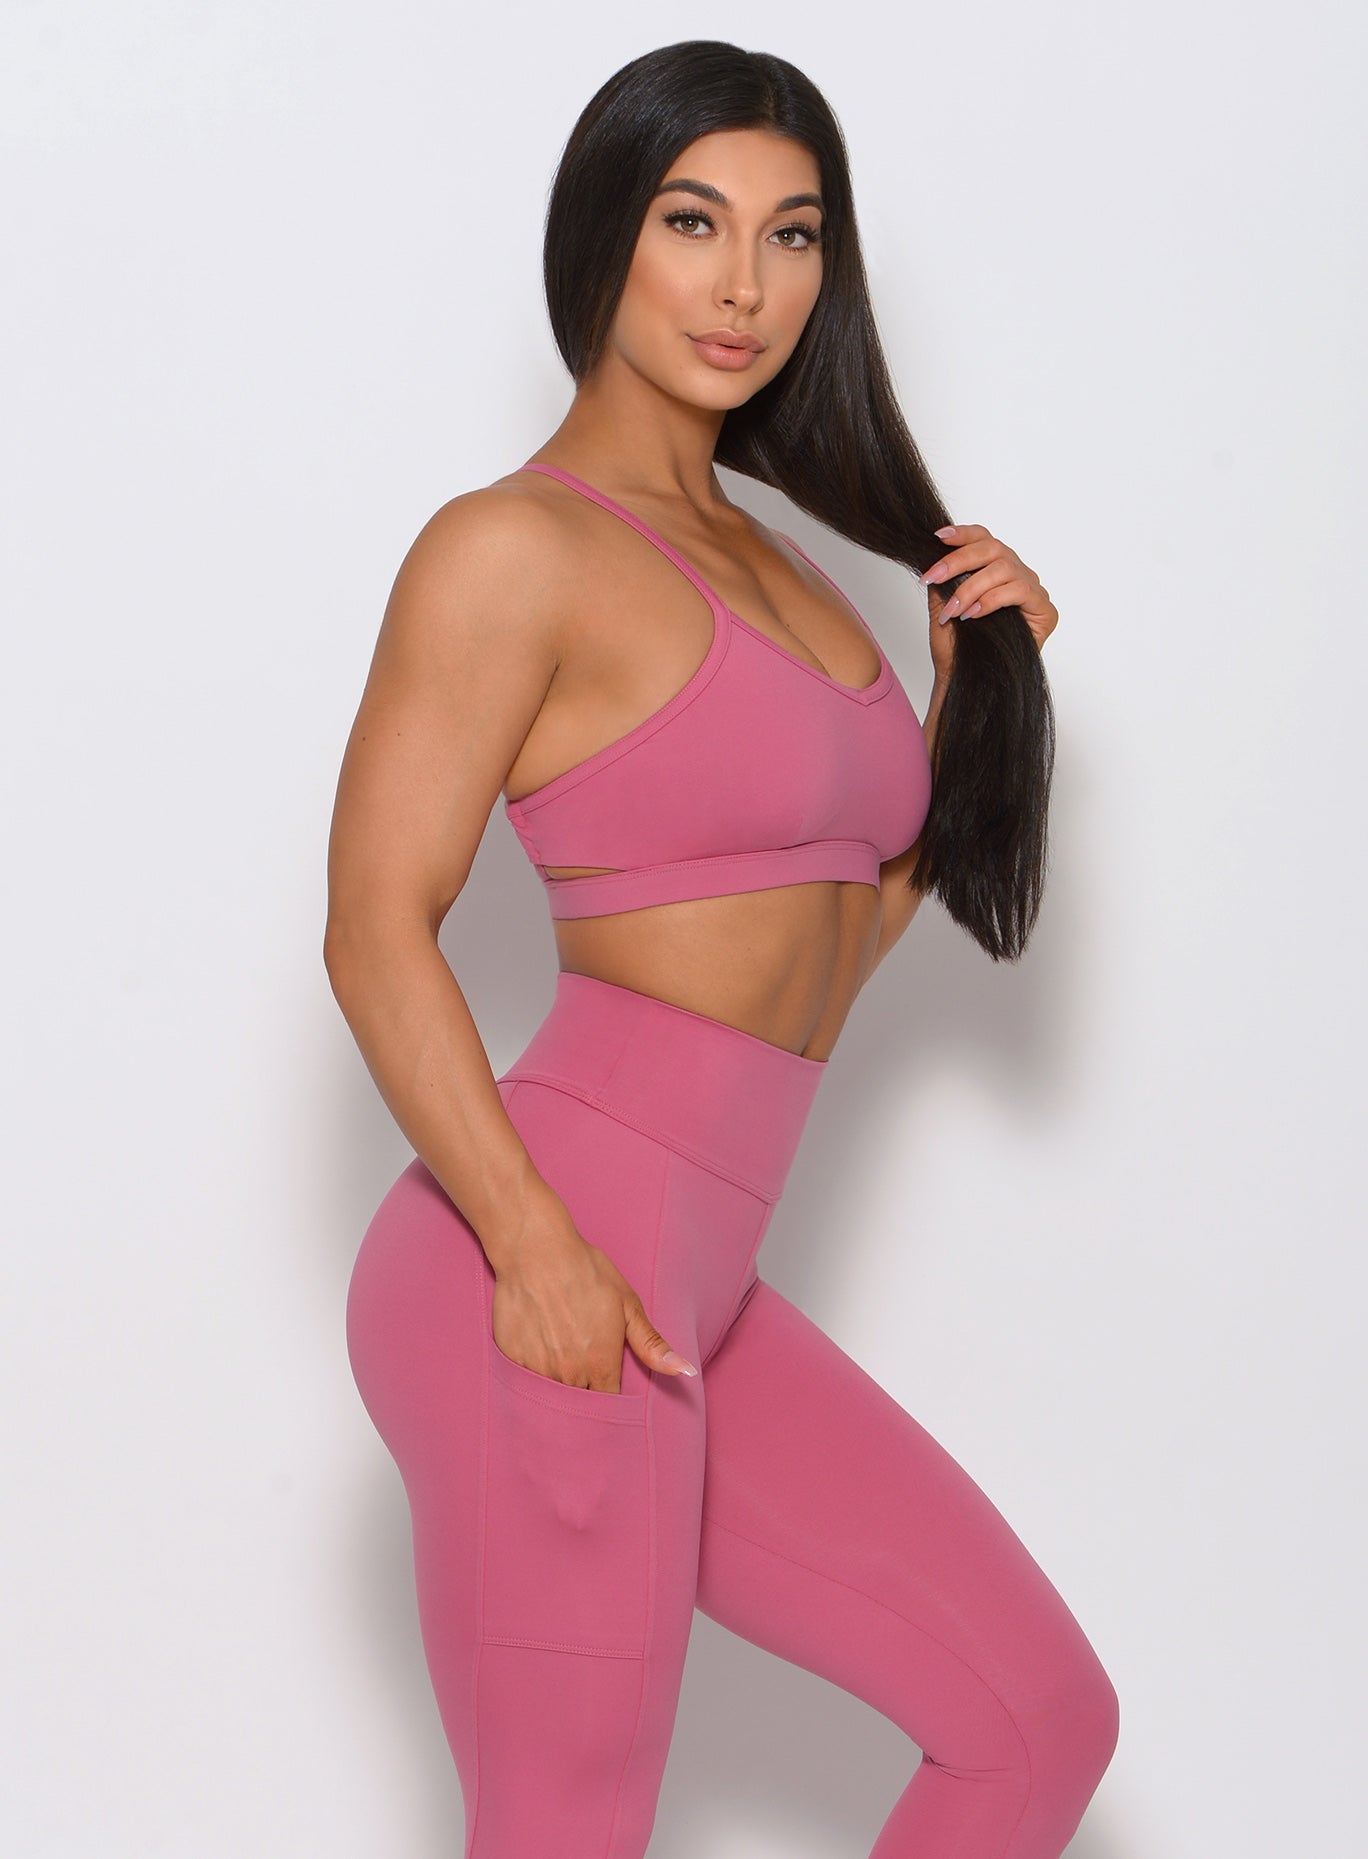 Right side view of the model wearing our pumped sports bra in blush color and a matching high waist leggings